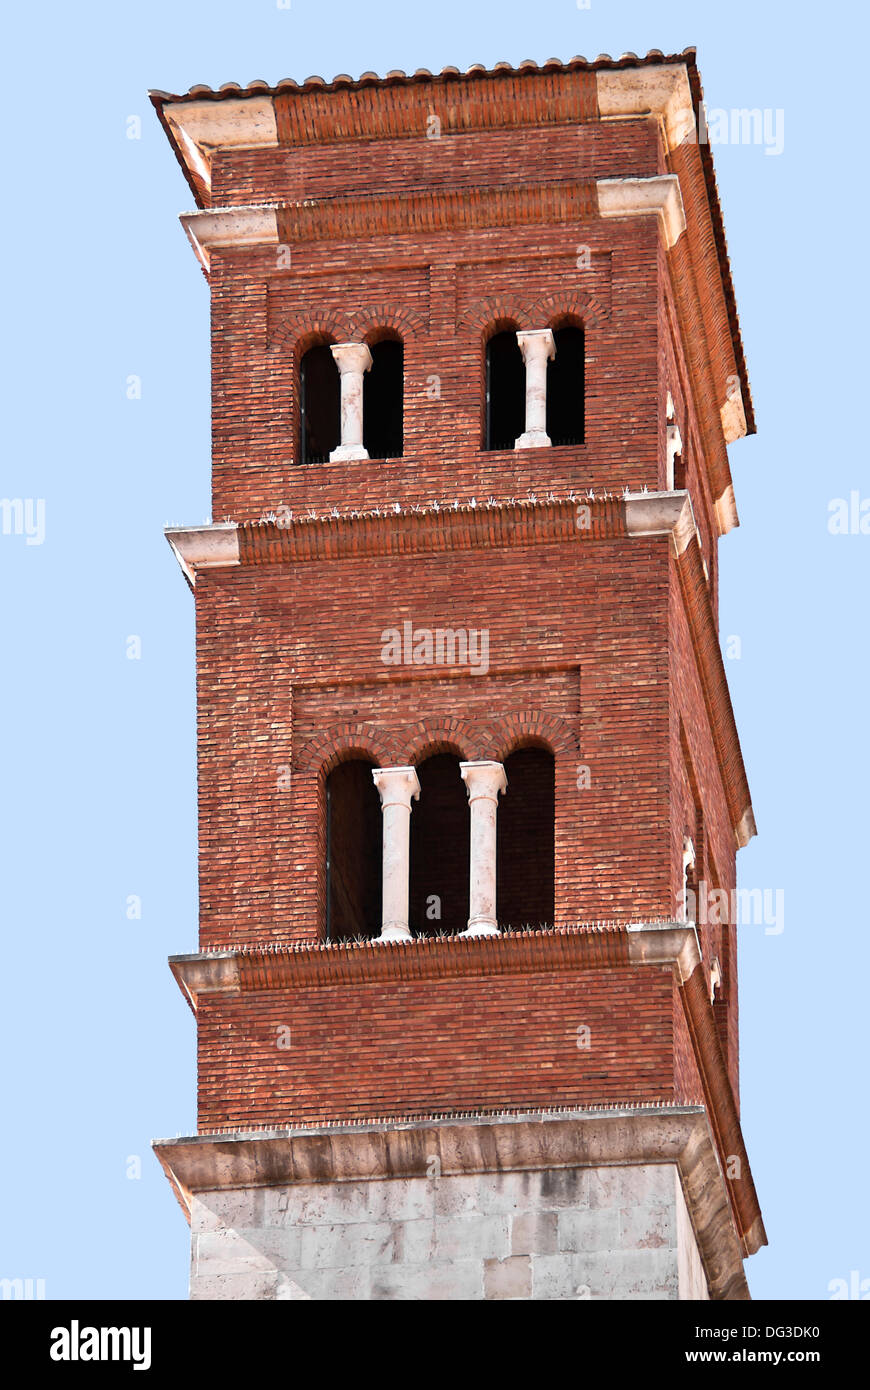 Minaret, tower, bell tower, Church of St. Andrew the Apostle of Teruel, Spain Stock Photo